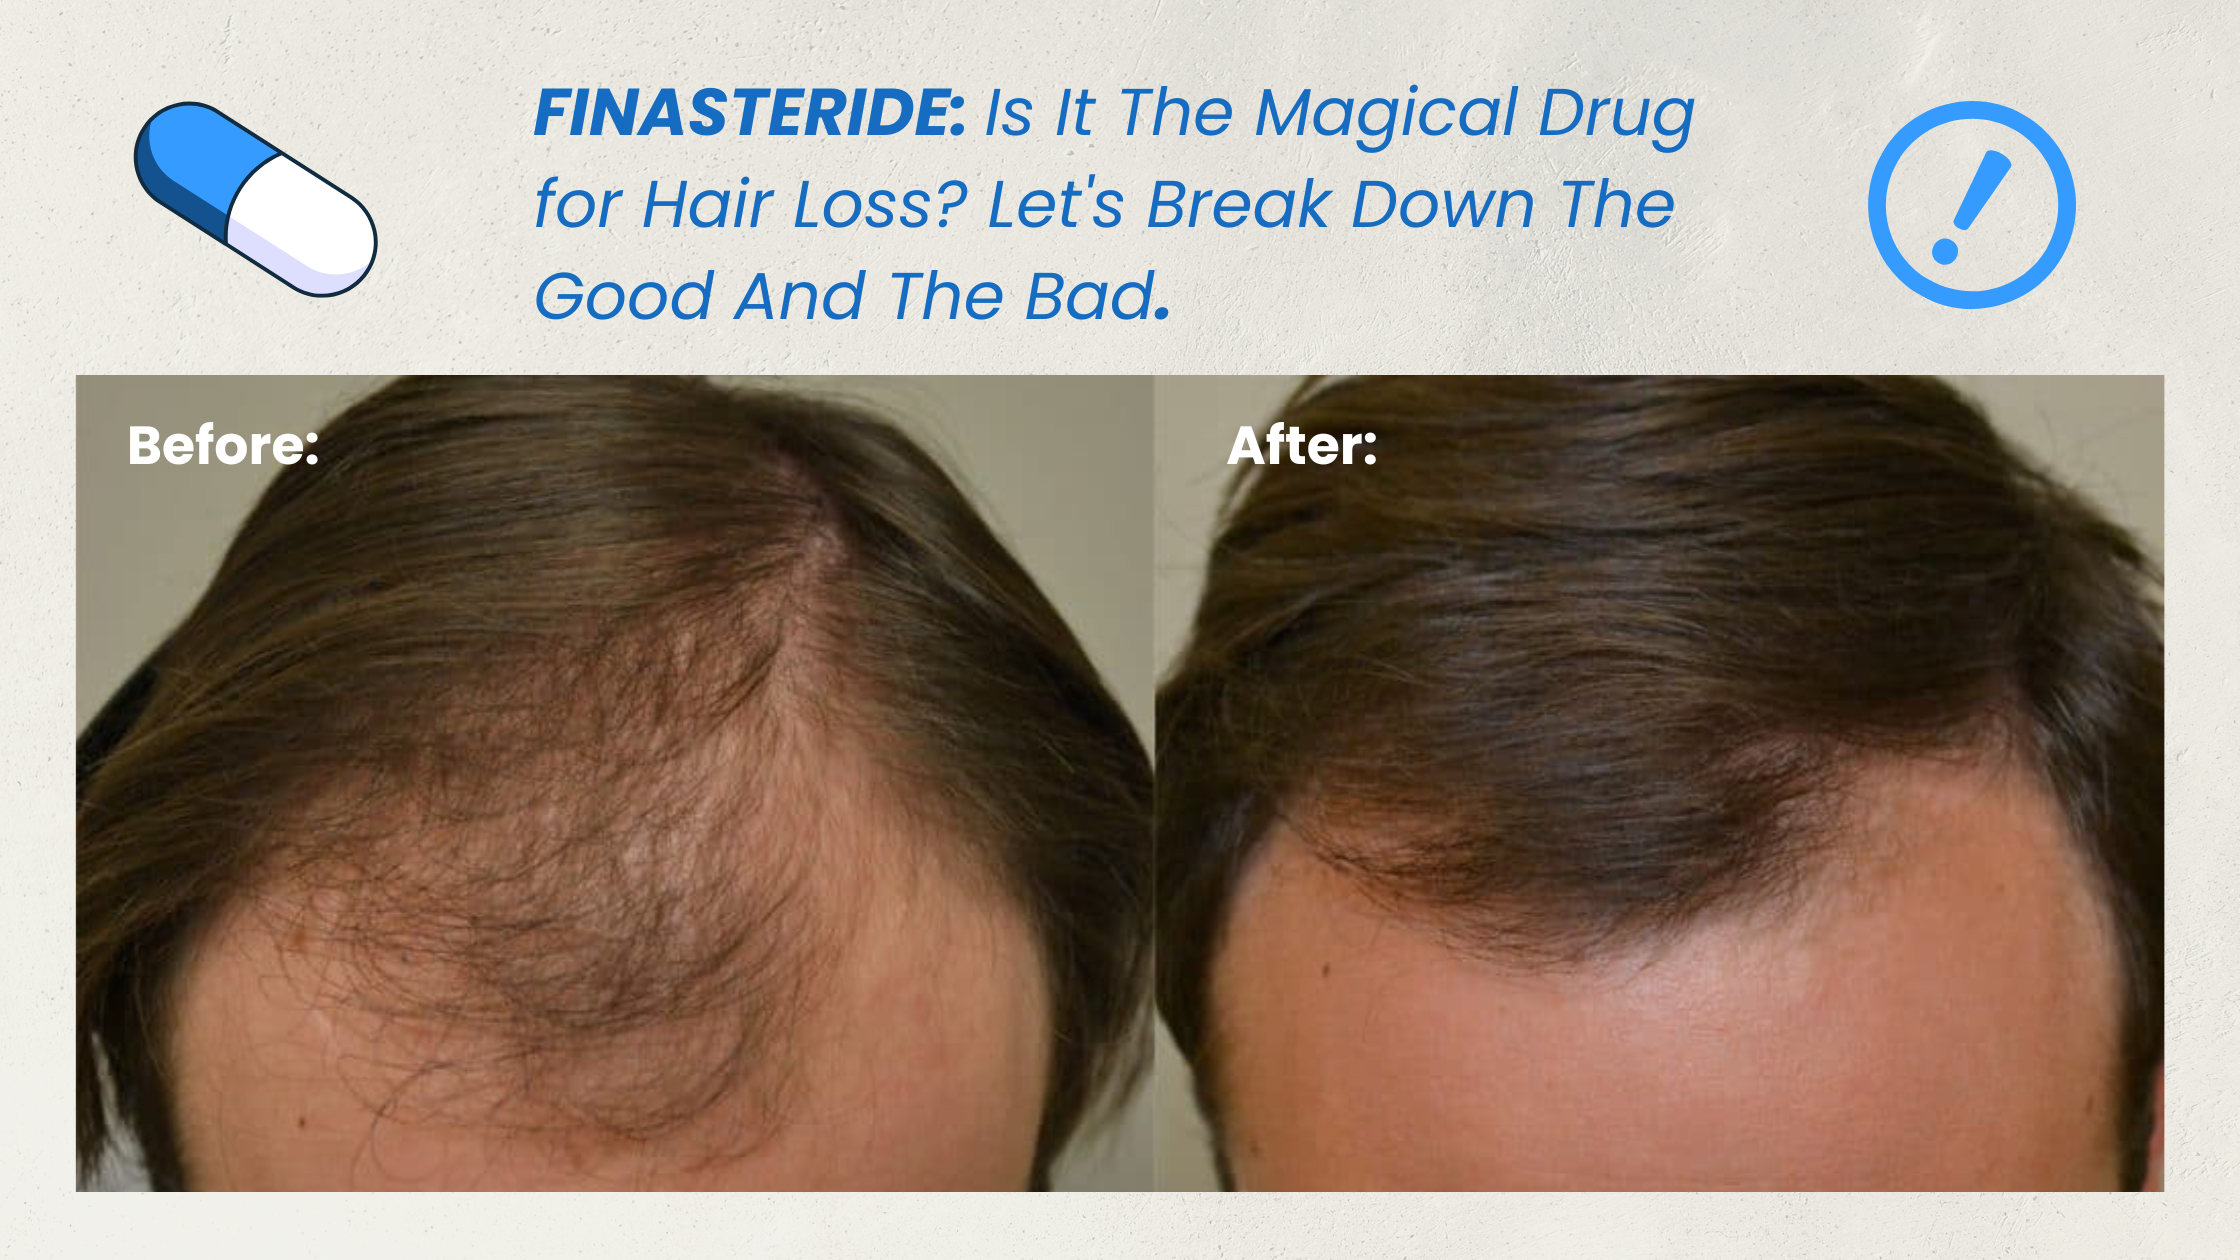 Finasteride: Is It The Magical Drug for Hair Loss? Let's Break Down The Good And The Bad.